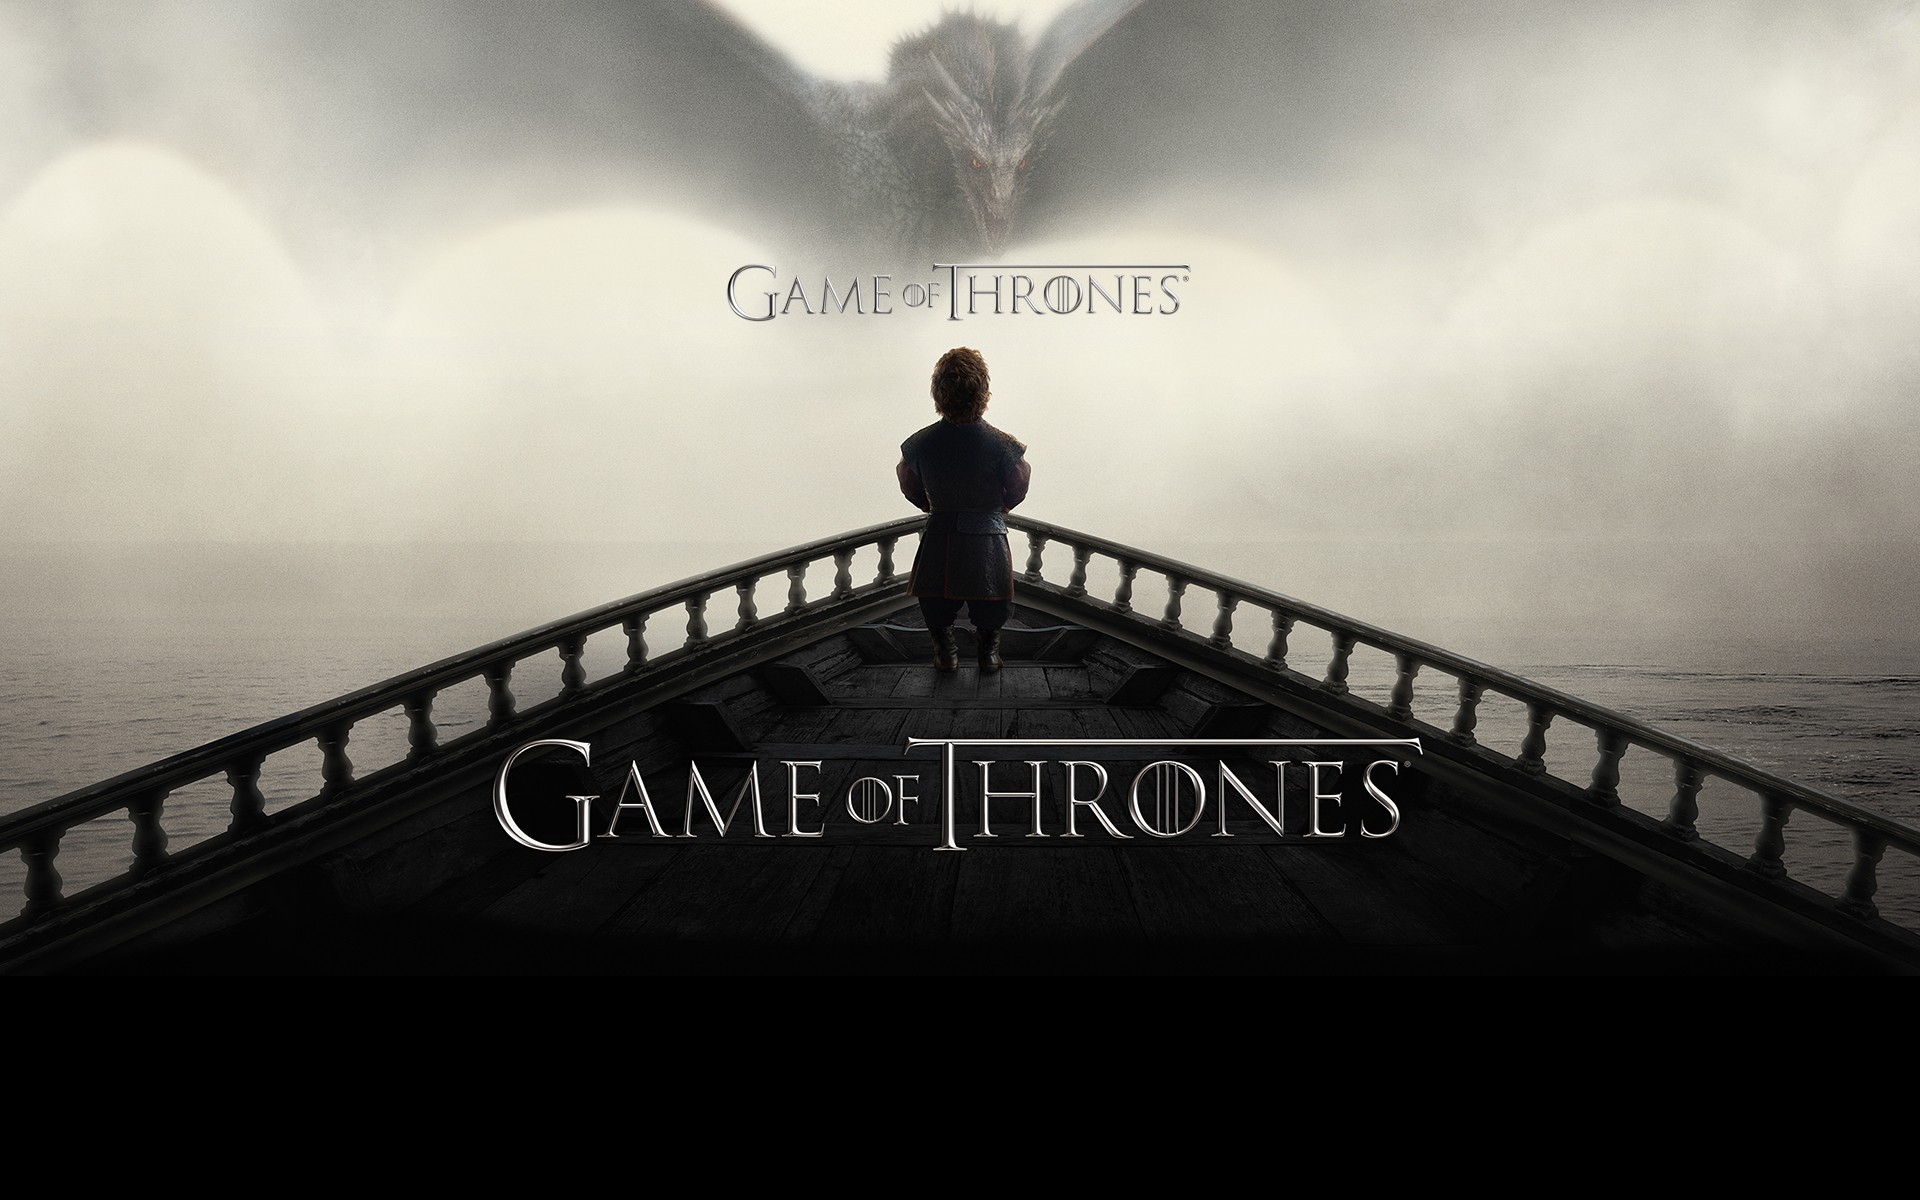  Game  of Thrones  wallpaper    Download free awesome HD  